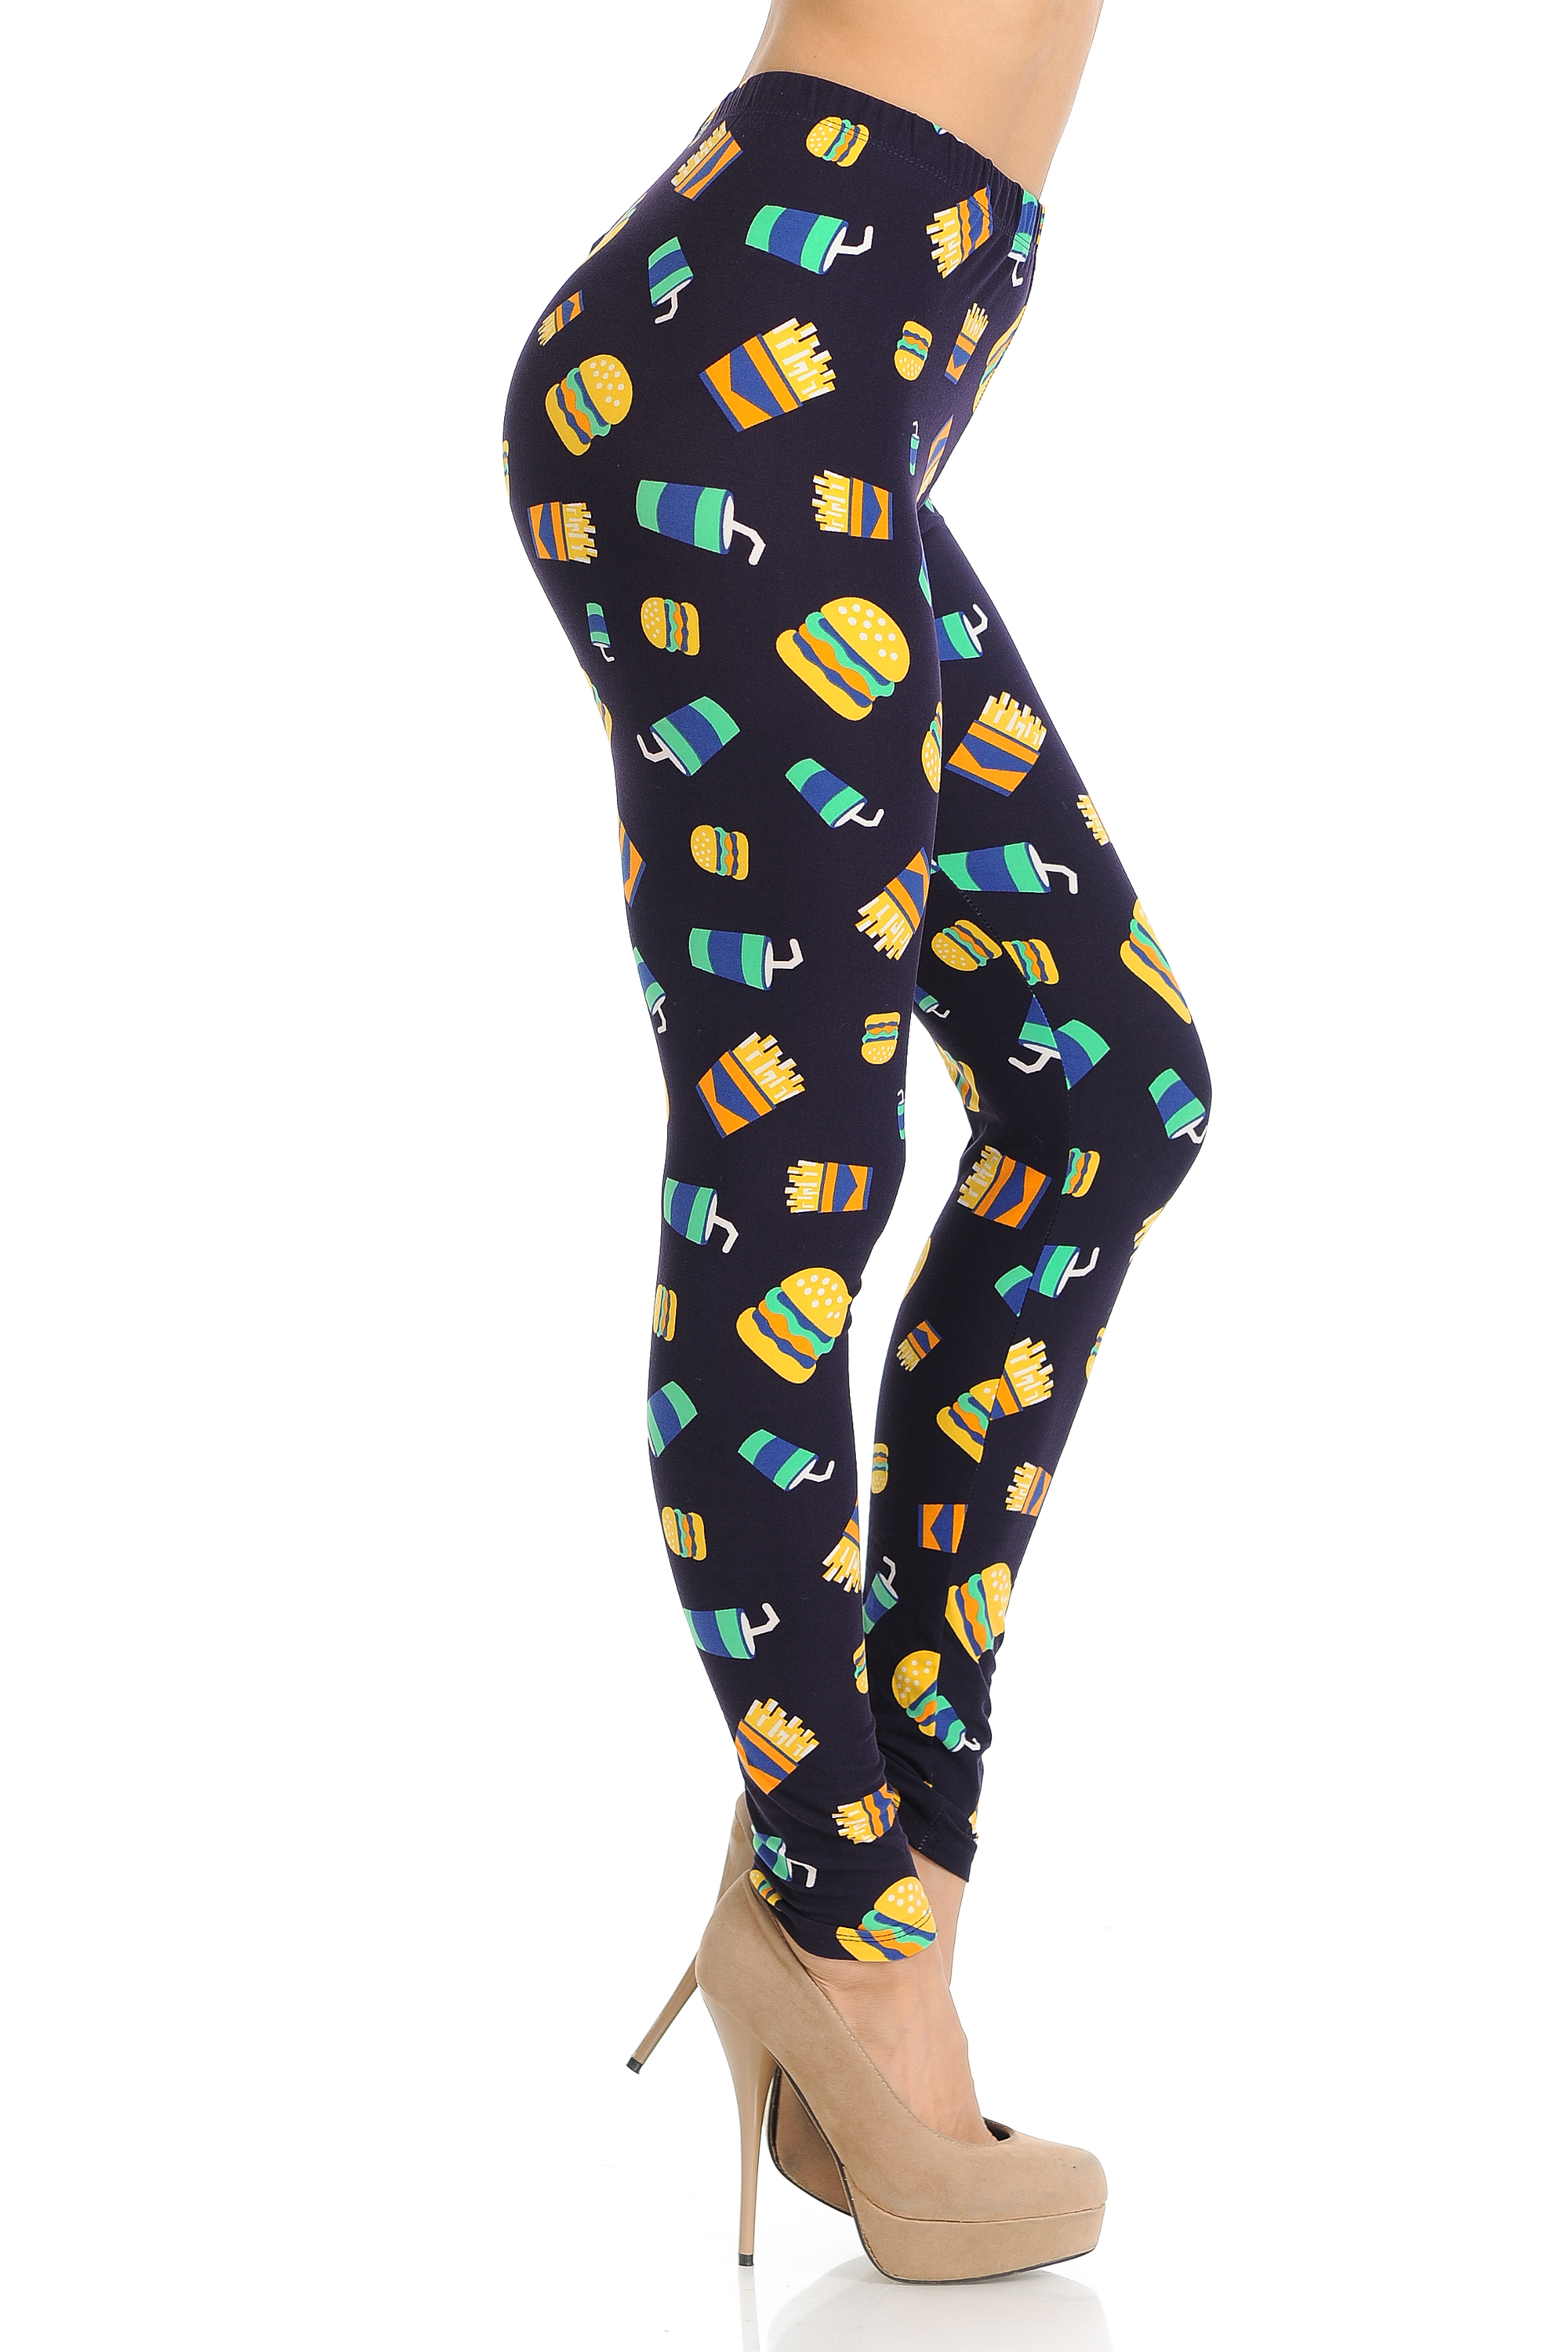 Wholesale Buttery Soft Fast Food Plus Size Leggings